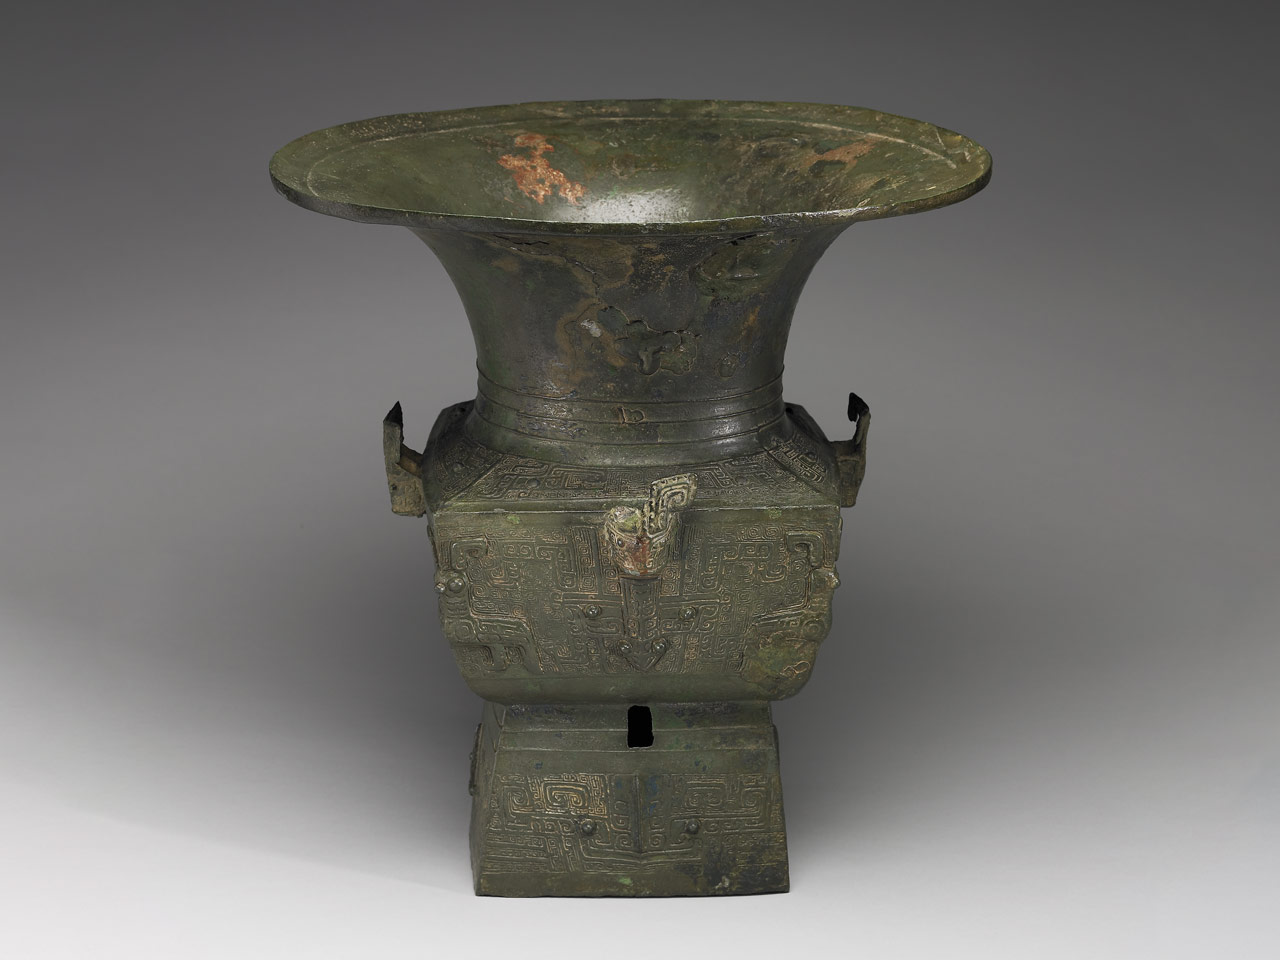 Square Zun wine vessel with round mouth, animal heads, and animal mask pattern, Late Shang Dynasty